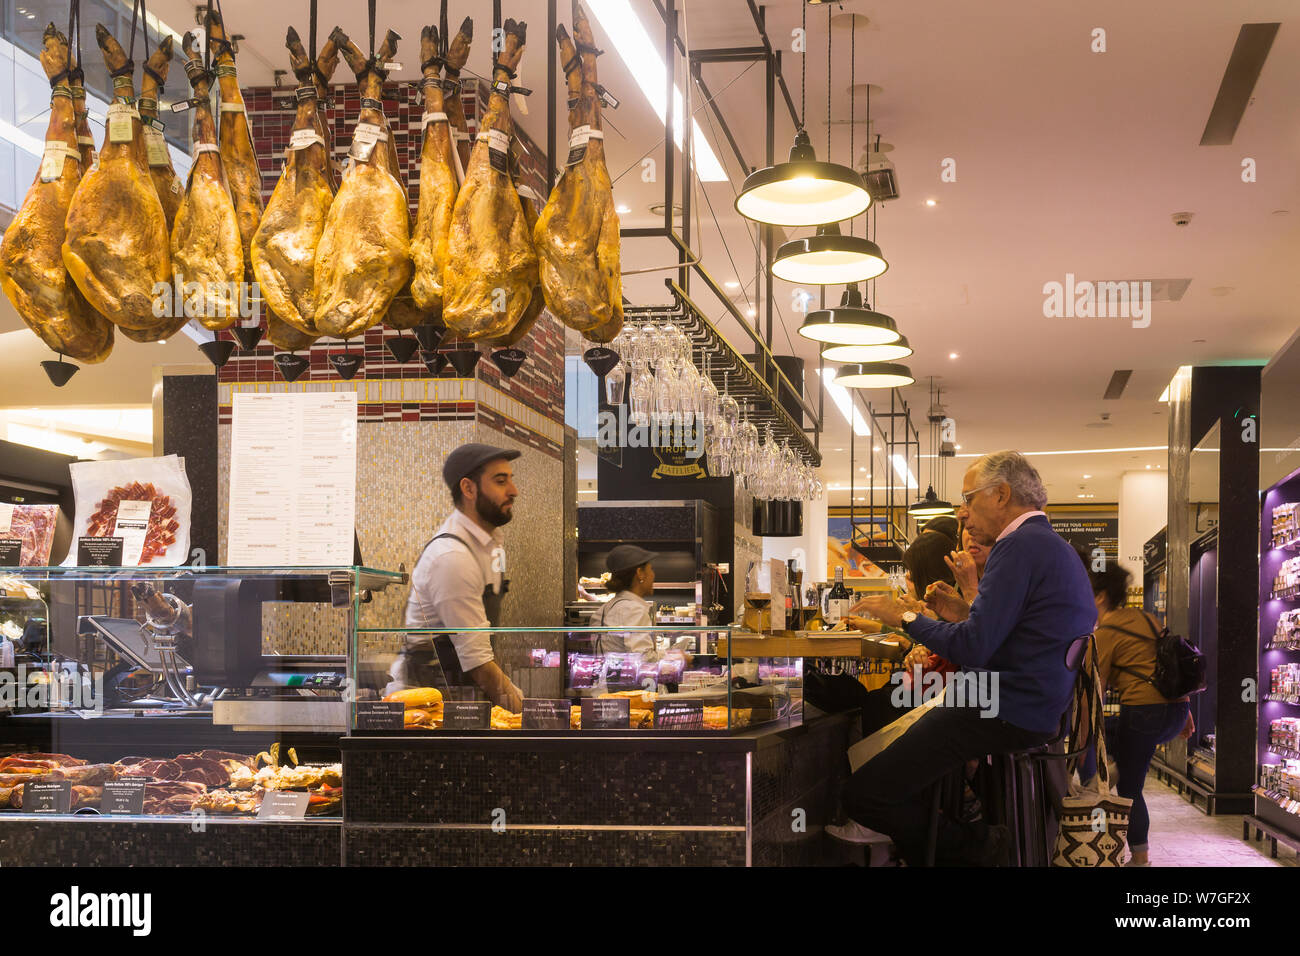 La Grande Epicerie Stock Photos and Images - 123RF